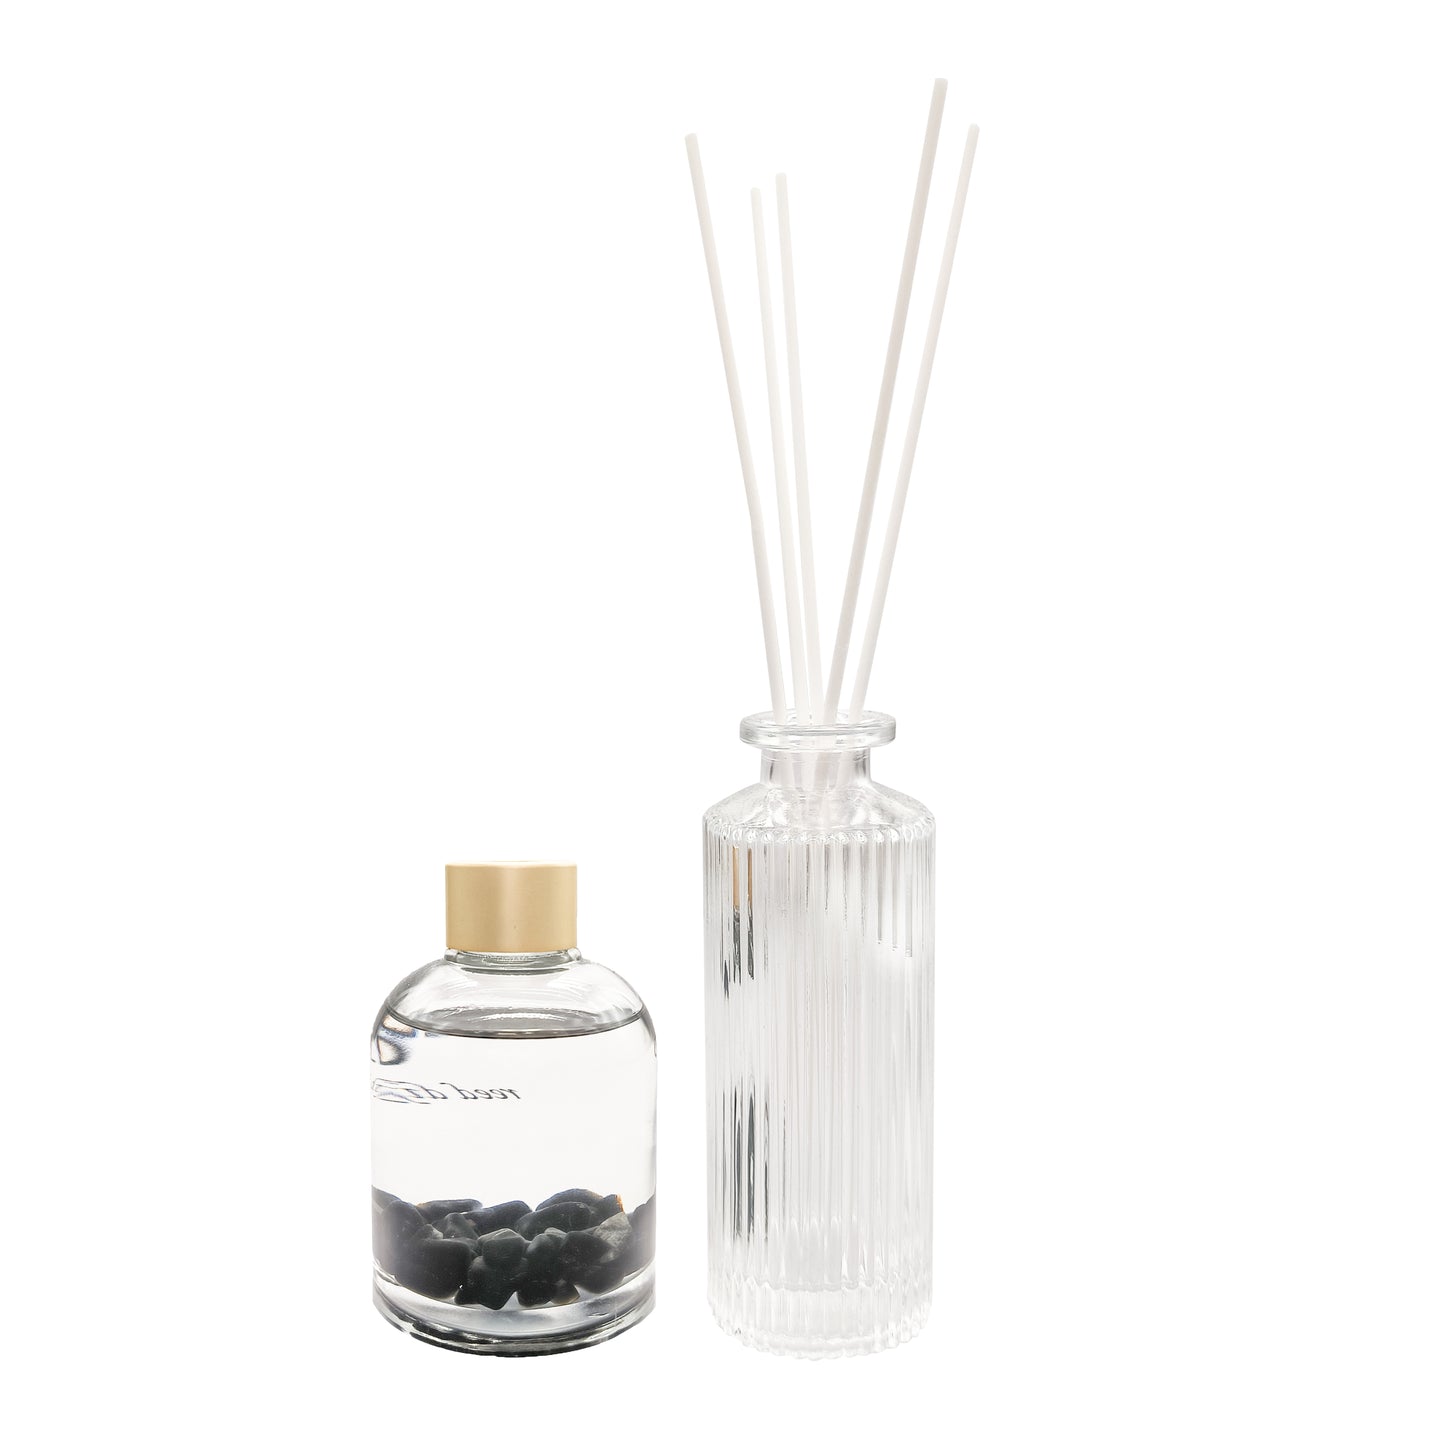 "Oh My Dog" Tangerine Reed Diffuser (Two Bottle Combo) 150 ml